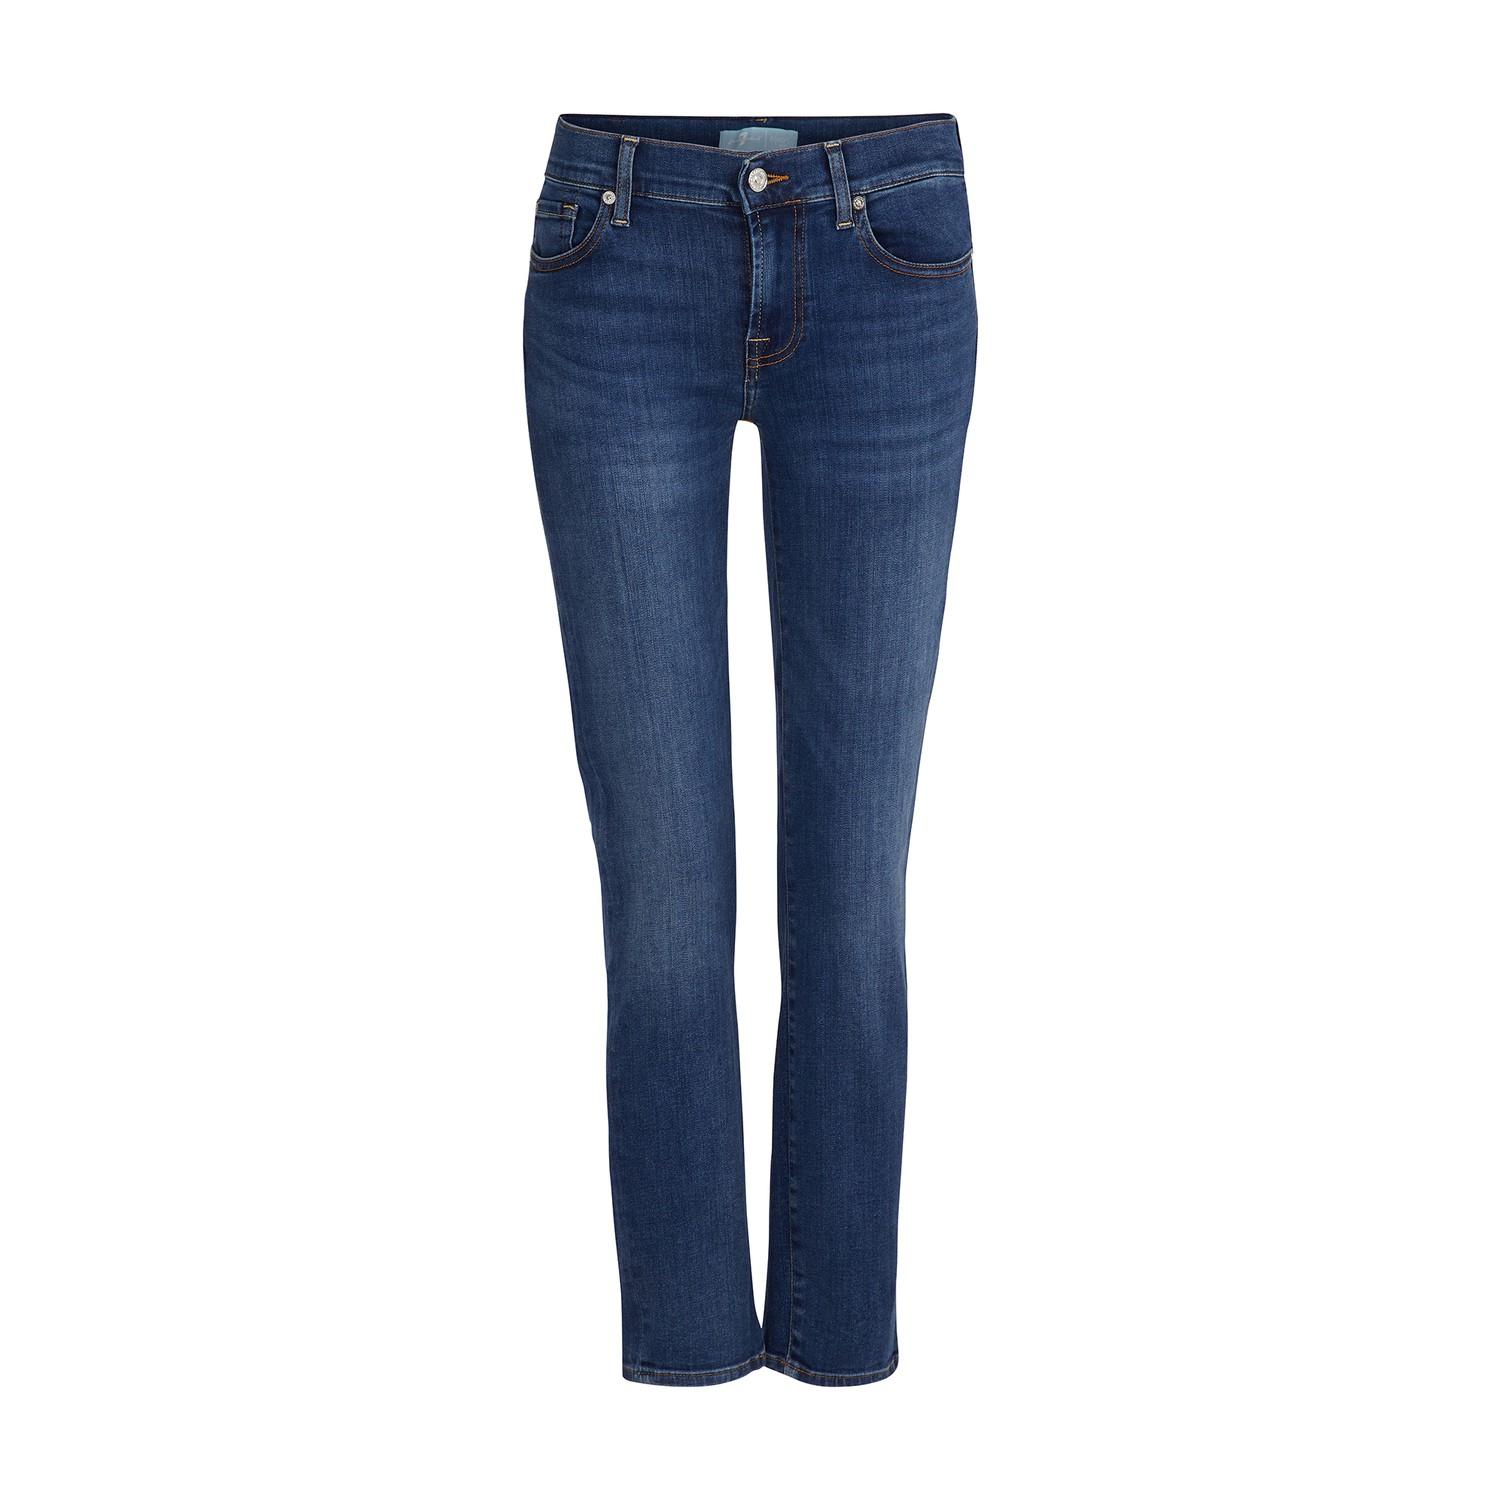 7 For All Mankind Denim Roxanne Cropped Mid-rise Jeans in Blue - Lyst